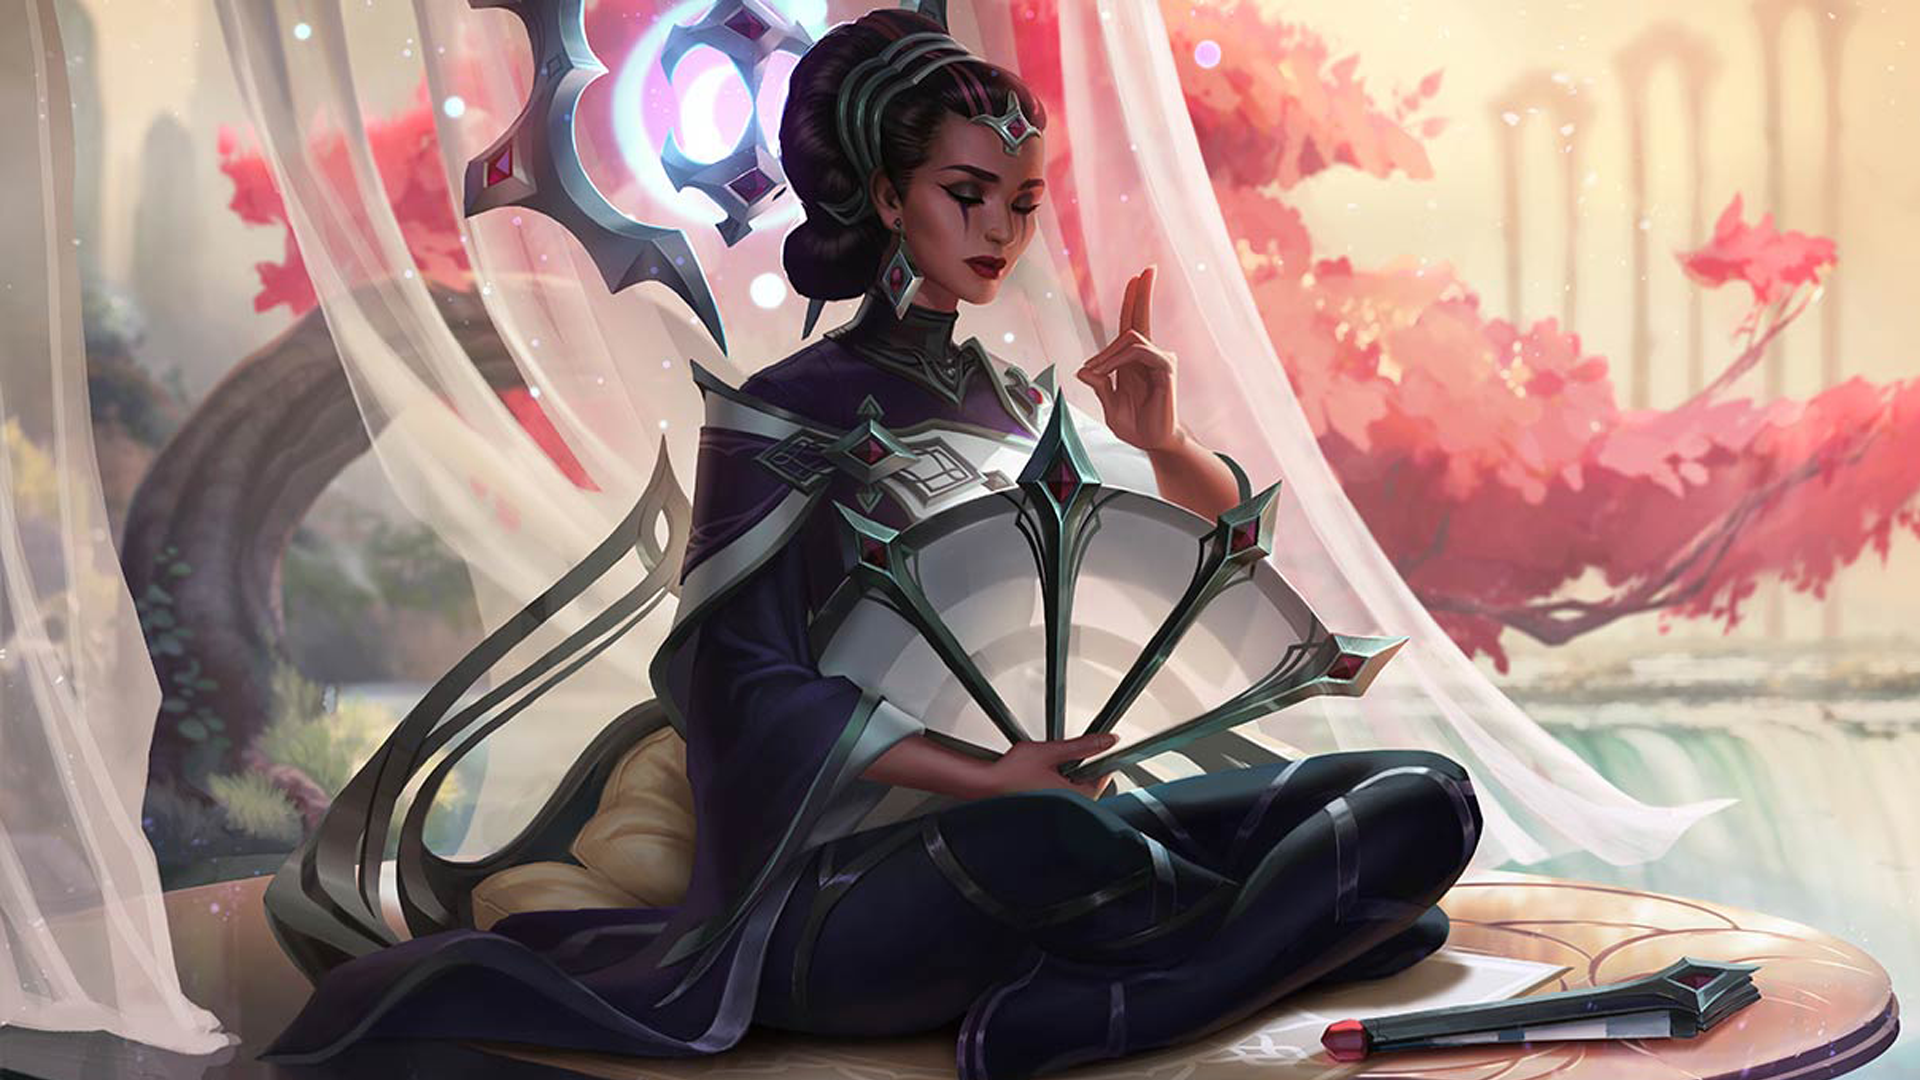 General 1920x1080 Karma (League of Legends) Summoner's Rift fantasy girl legs crossed PC gaming closed eyes video game girls video game characters women fans red lipstick fantasy art